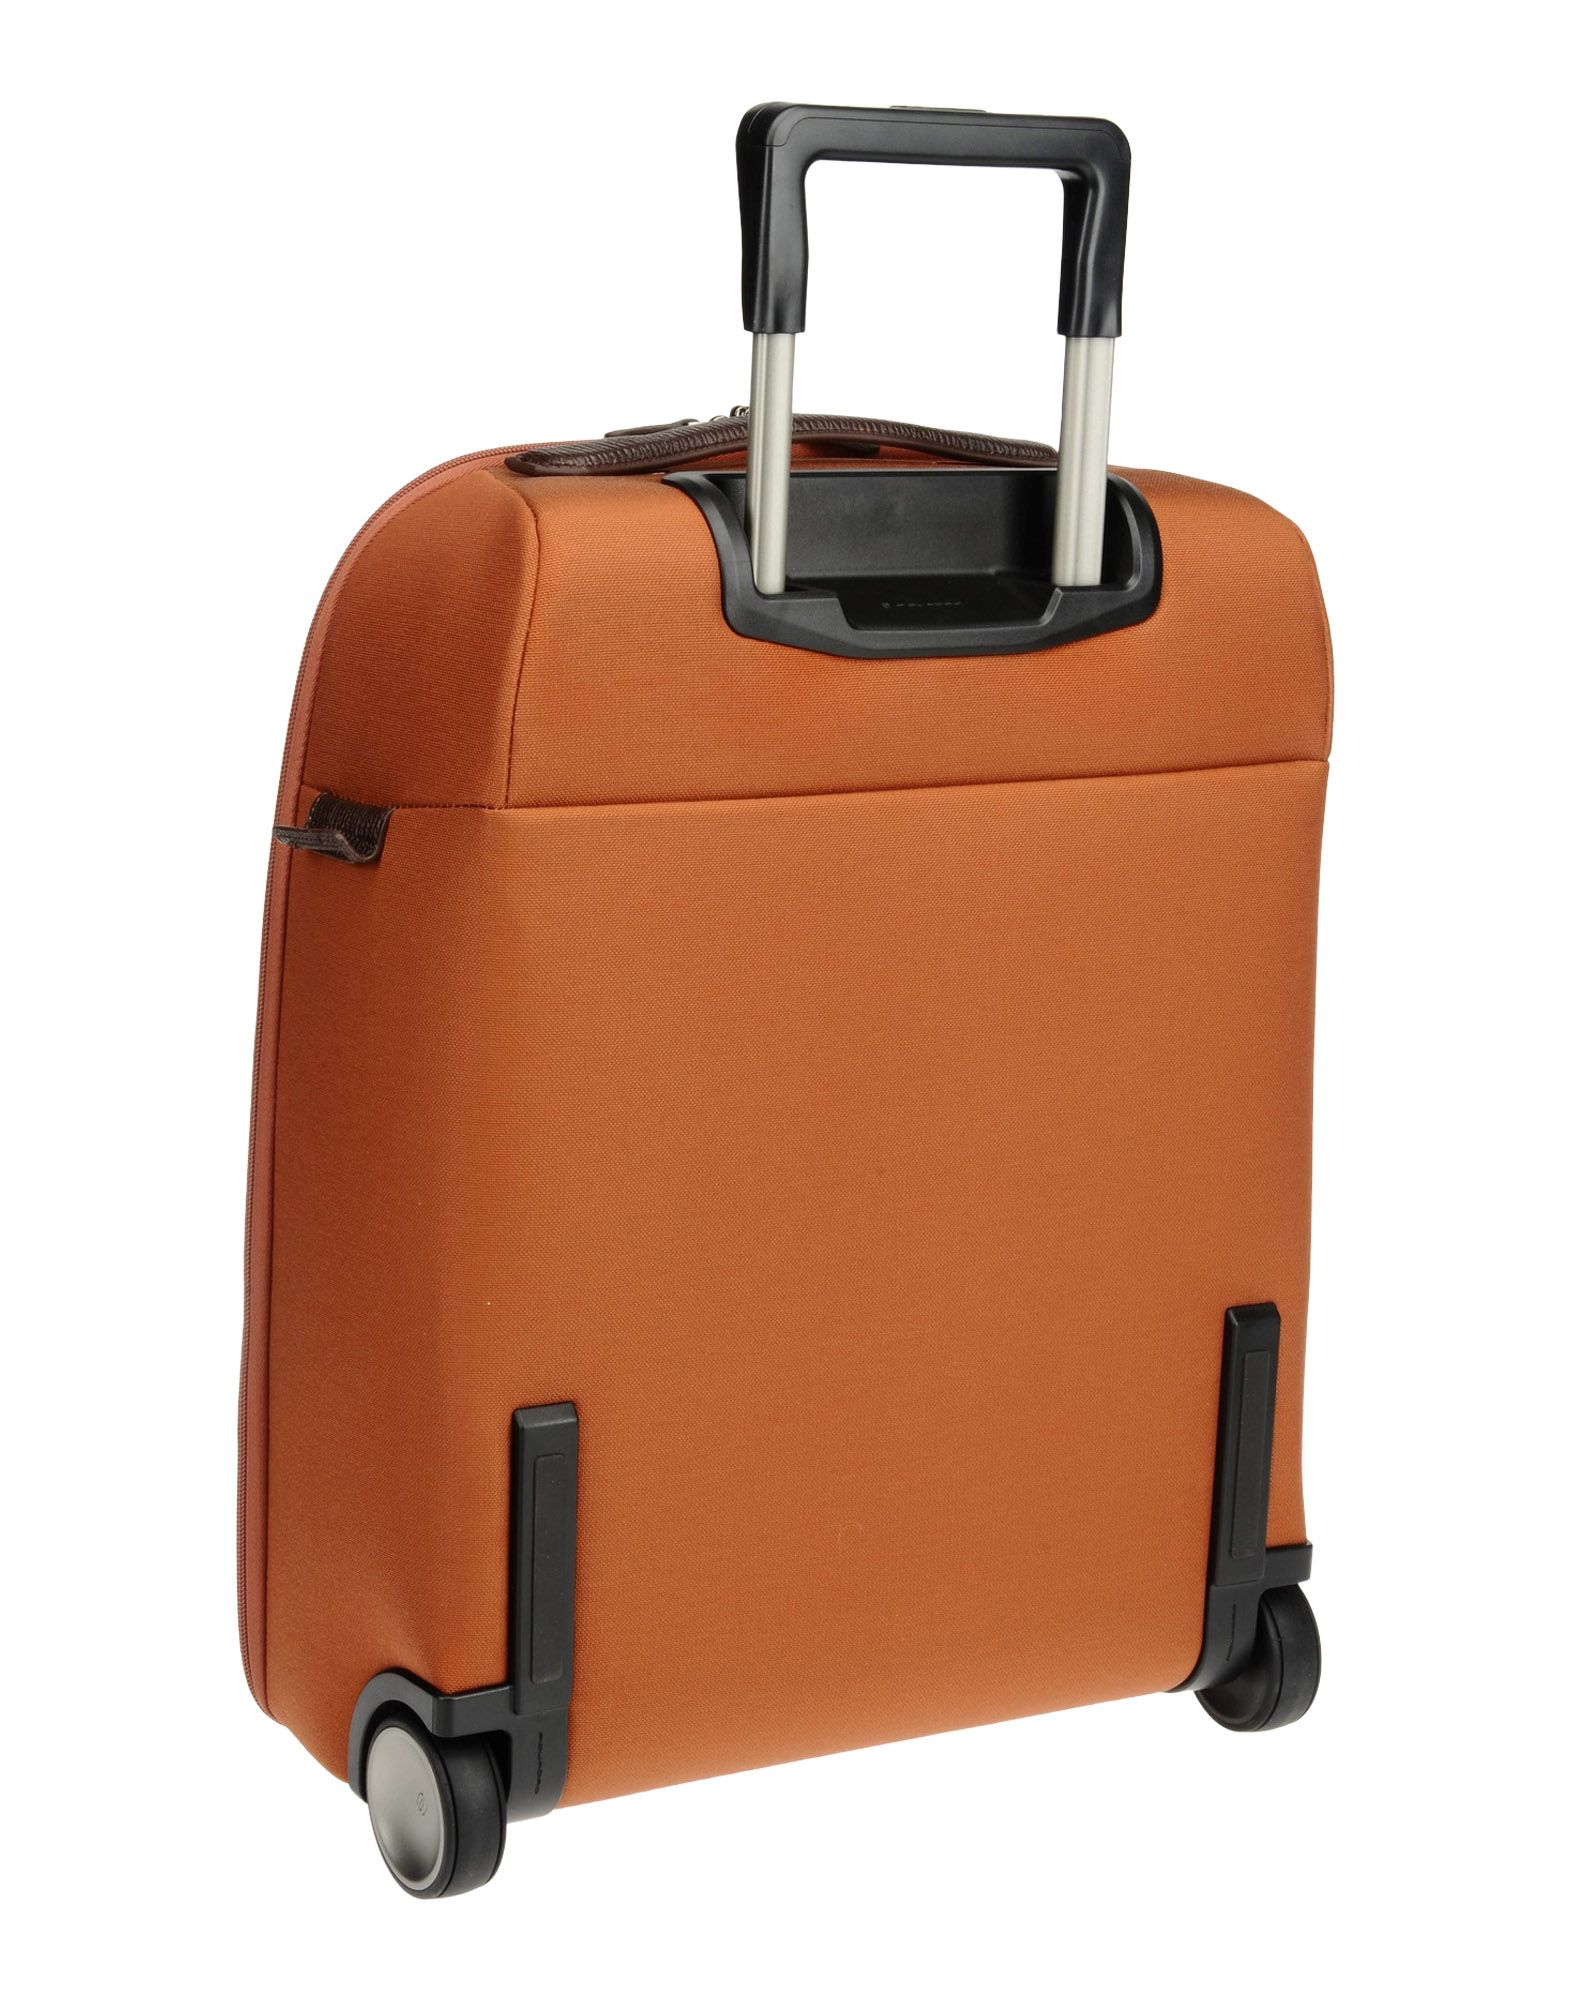 Piquadro Wheeled Luggage in Rust (Brown) for Men - Lyst